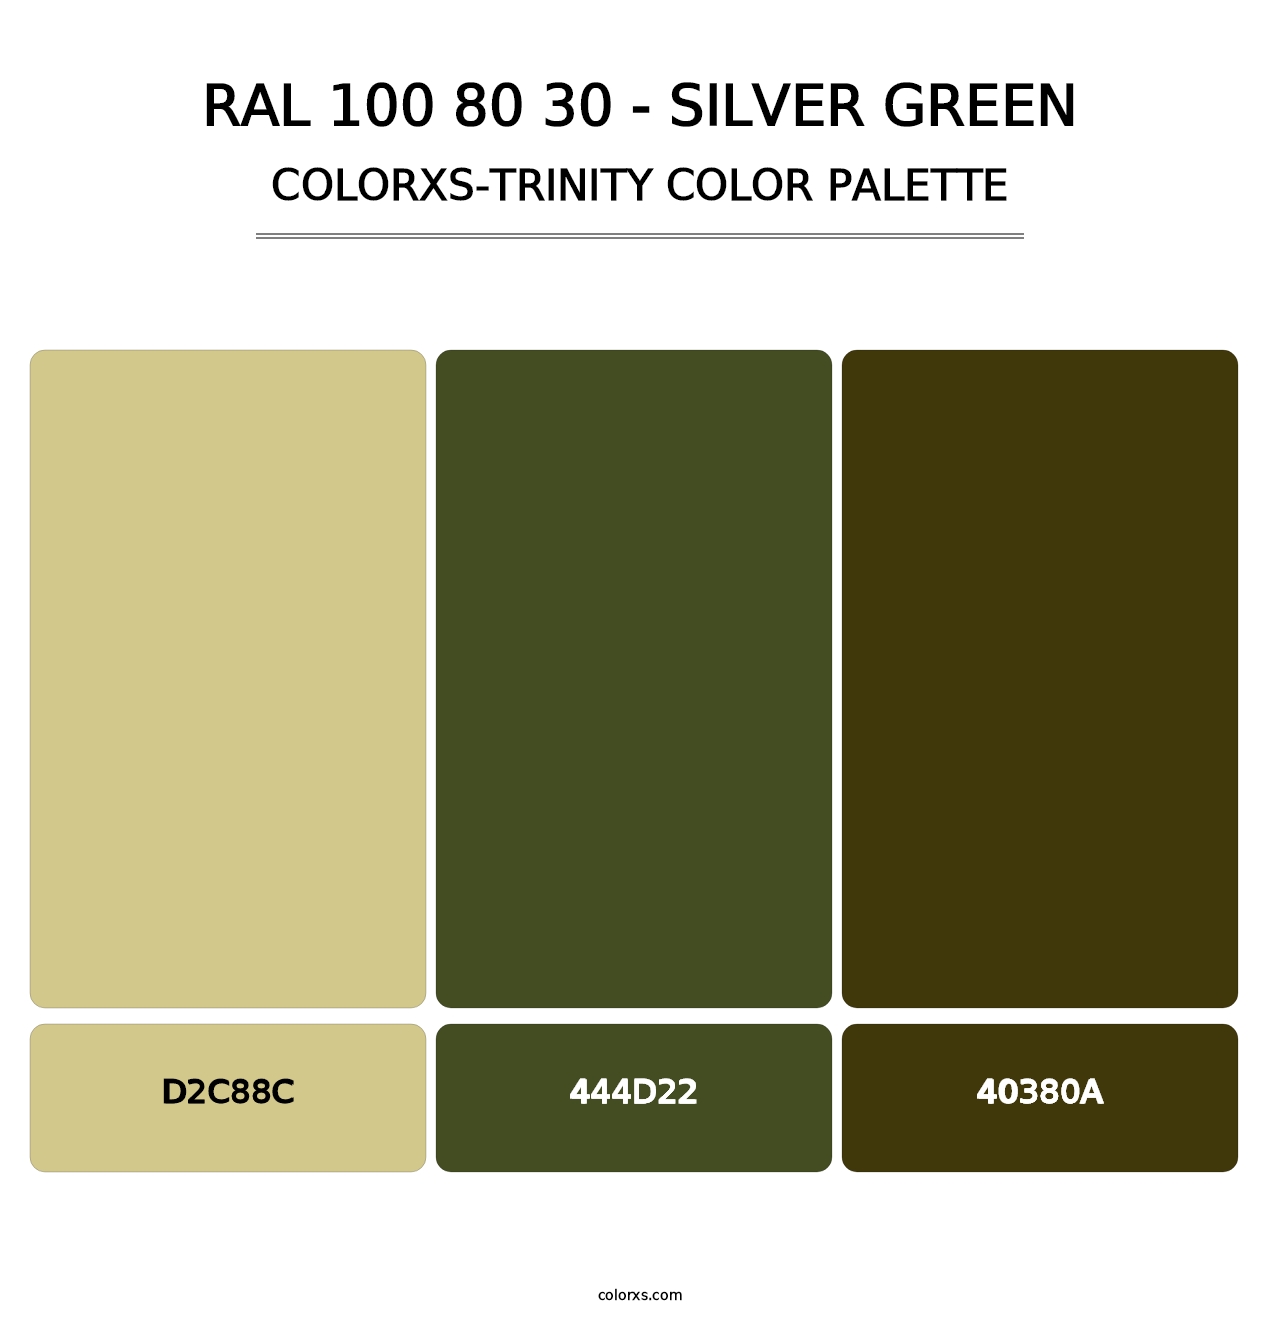 RAL 100 80 30 - Silver Green - Colorxs Trinity Palette